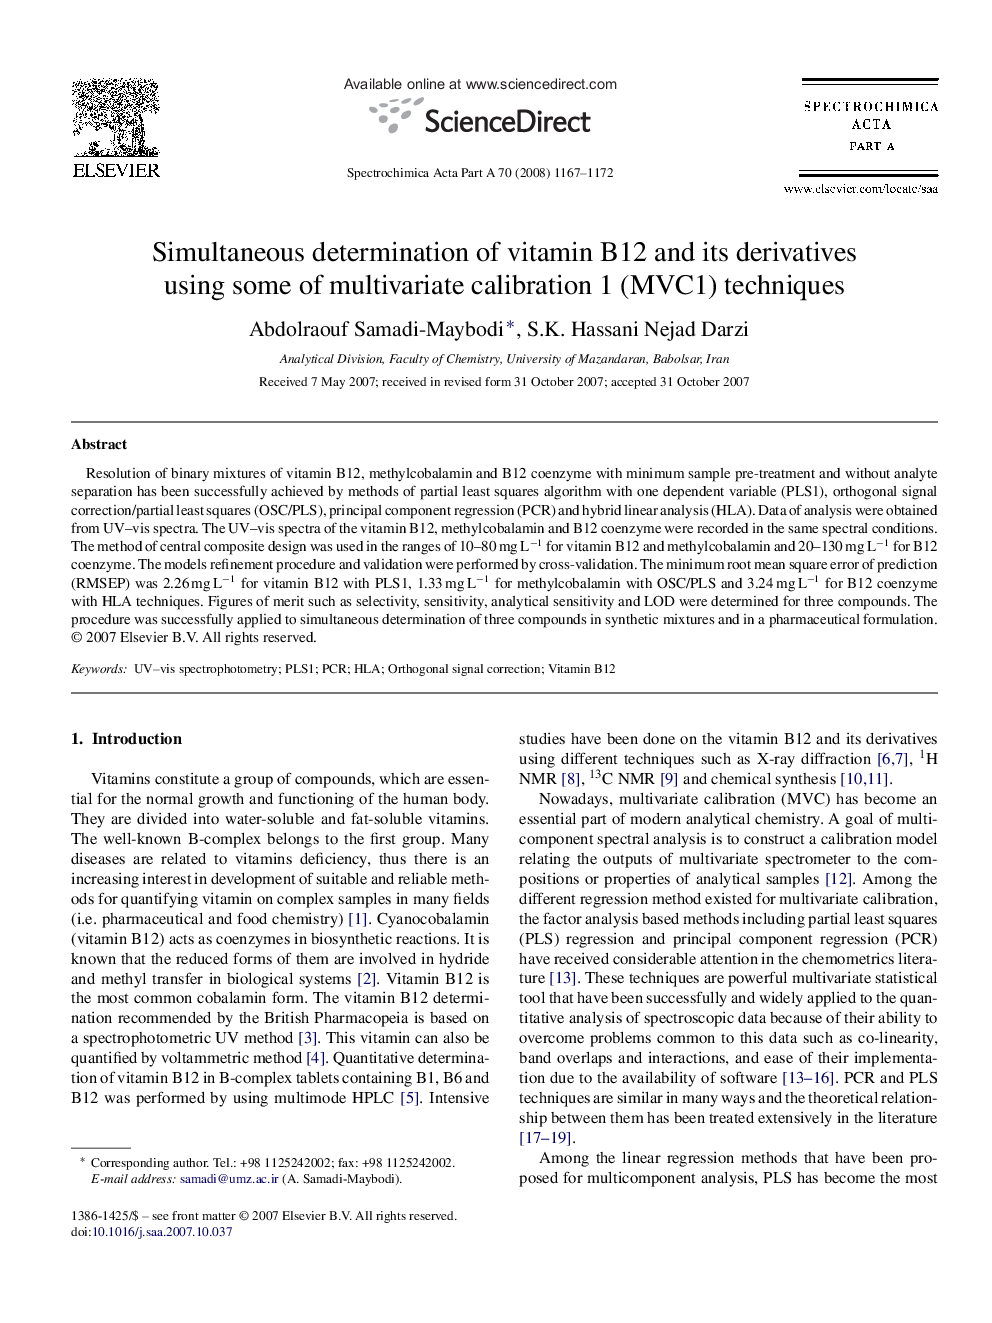 Simultaneous determination of vitamin B12 and its derivatives using some of multivariate calibration 1 (MVC1) techniques